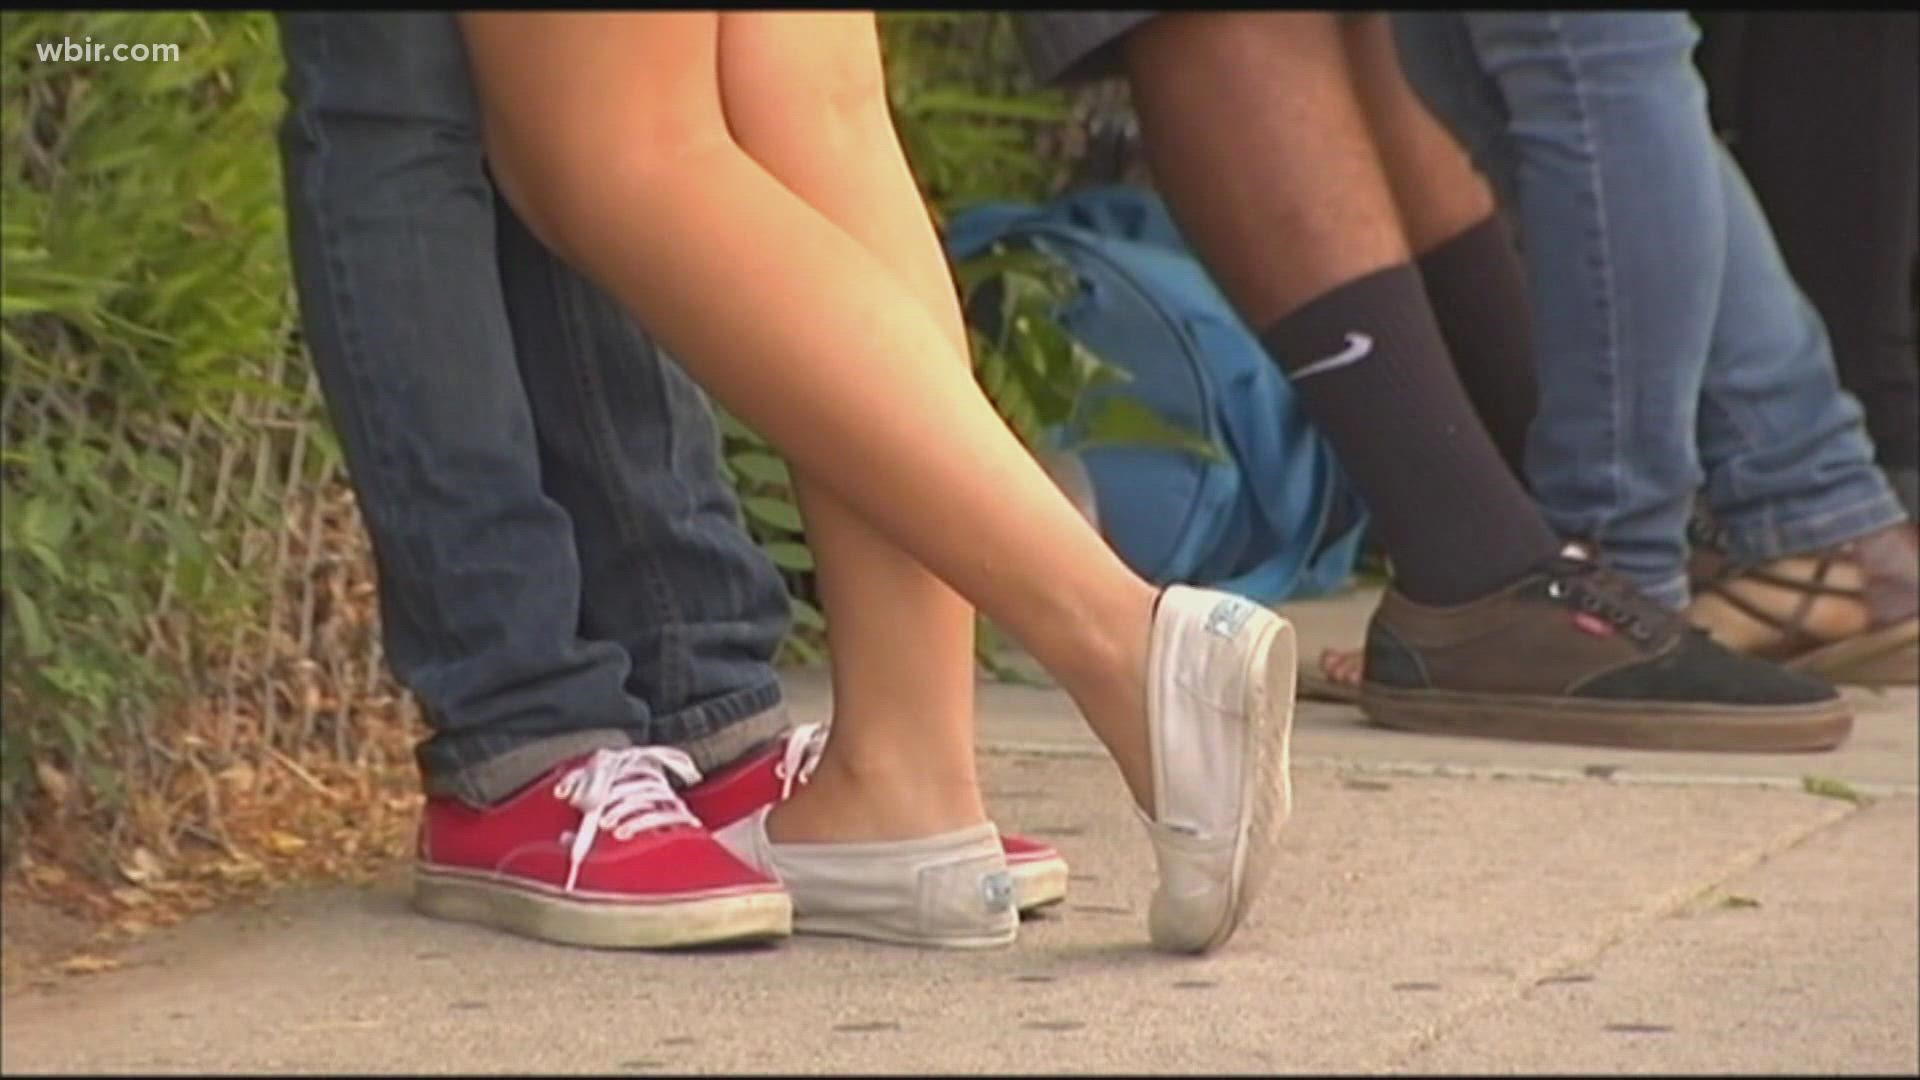 Officials said that dating abuse among high school girls is more common in Tennessee than anywhere else in the U.S.